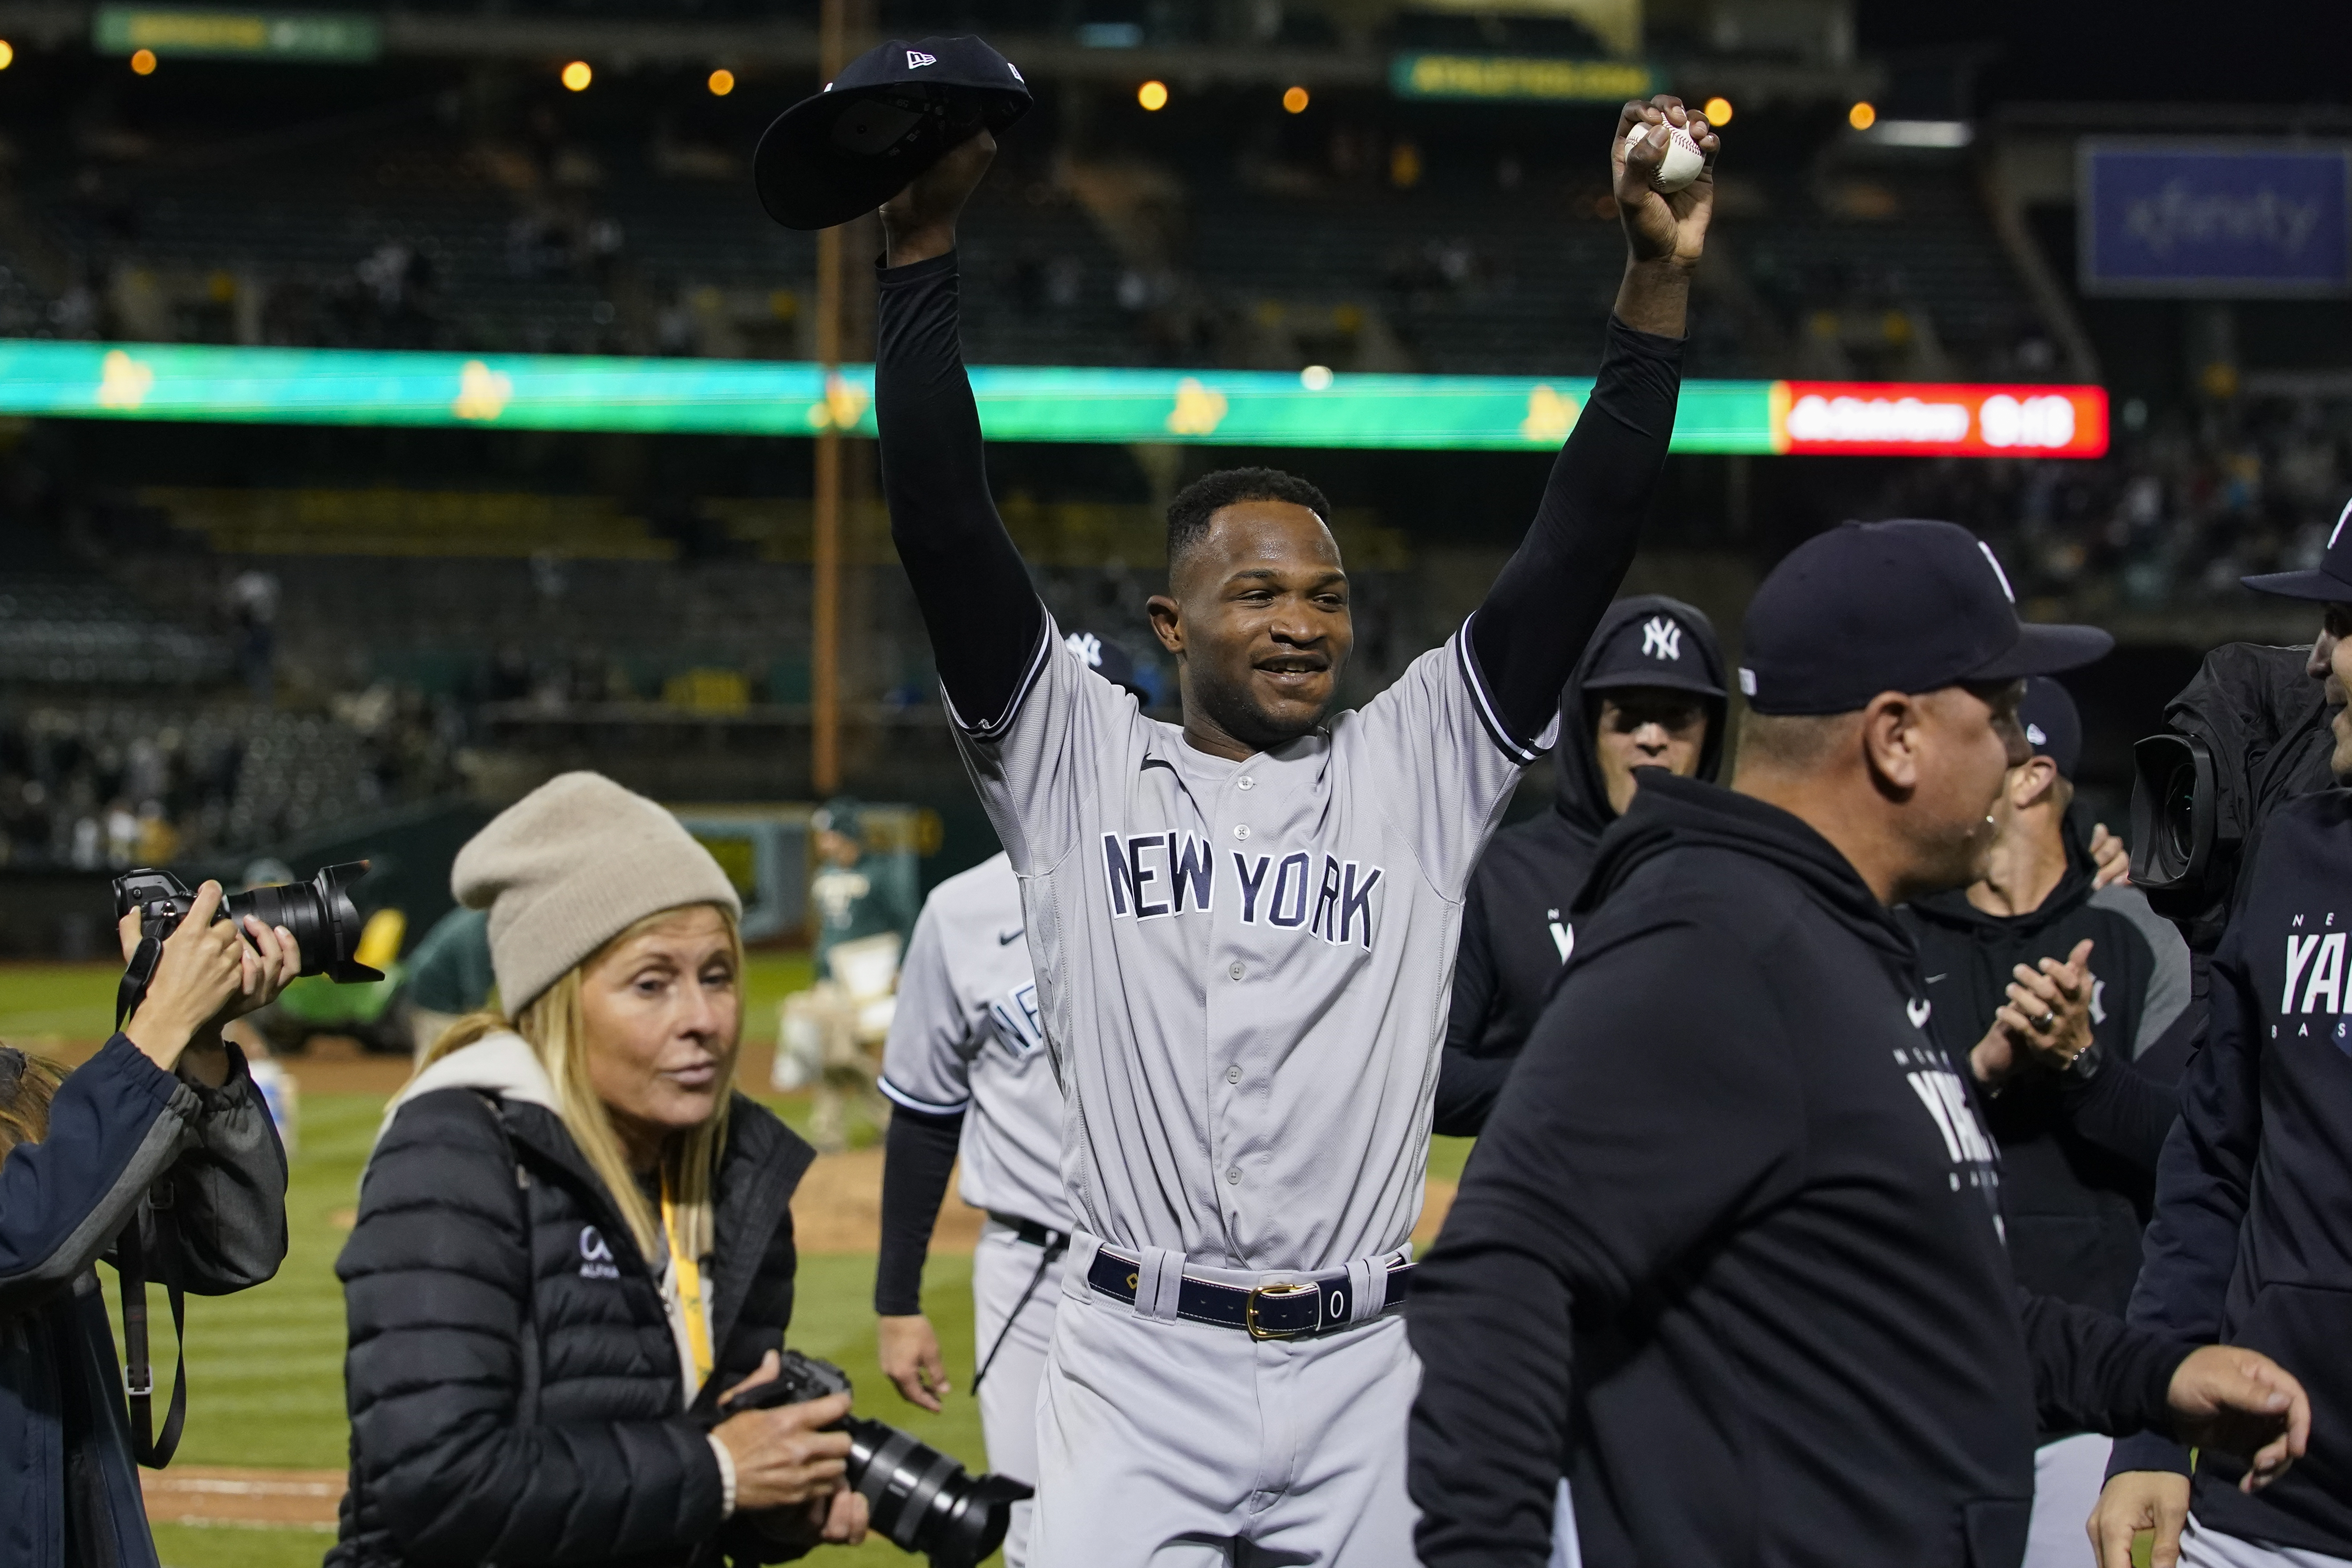 PERFECT GAME! Yankees' Domingo Germán makes history in 11-0 win